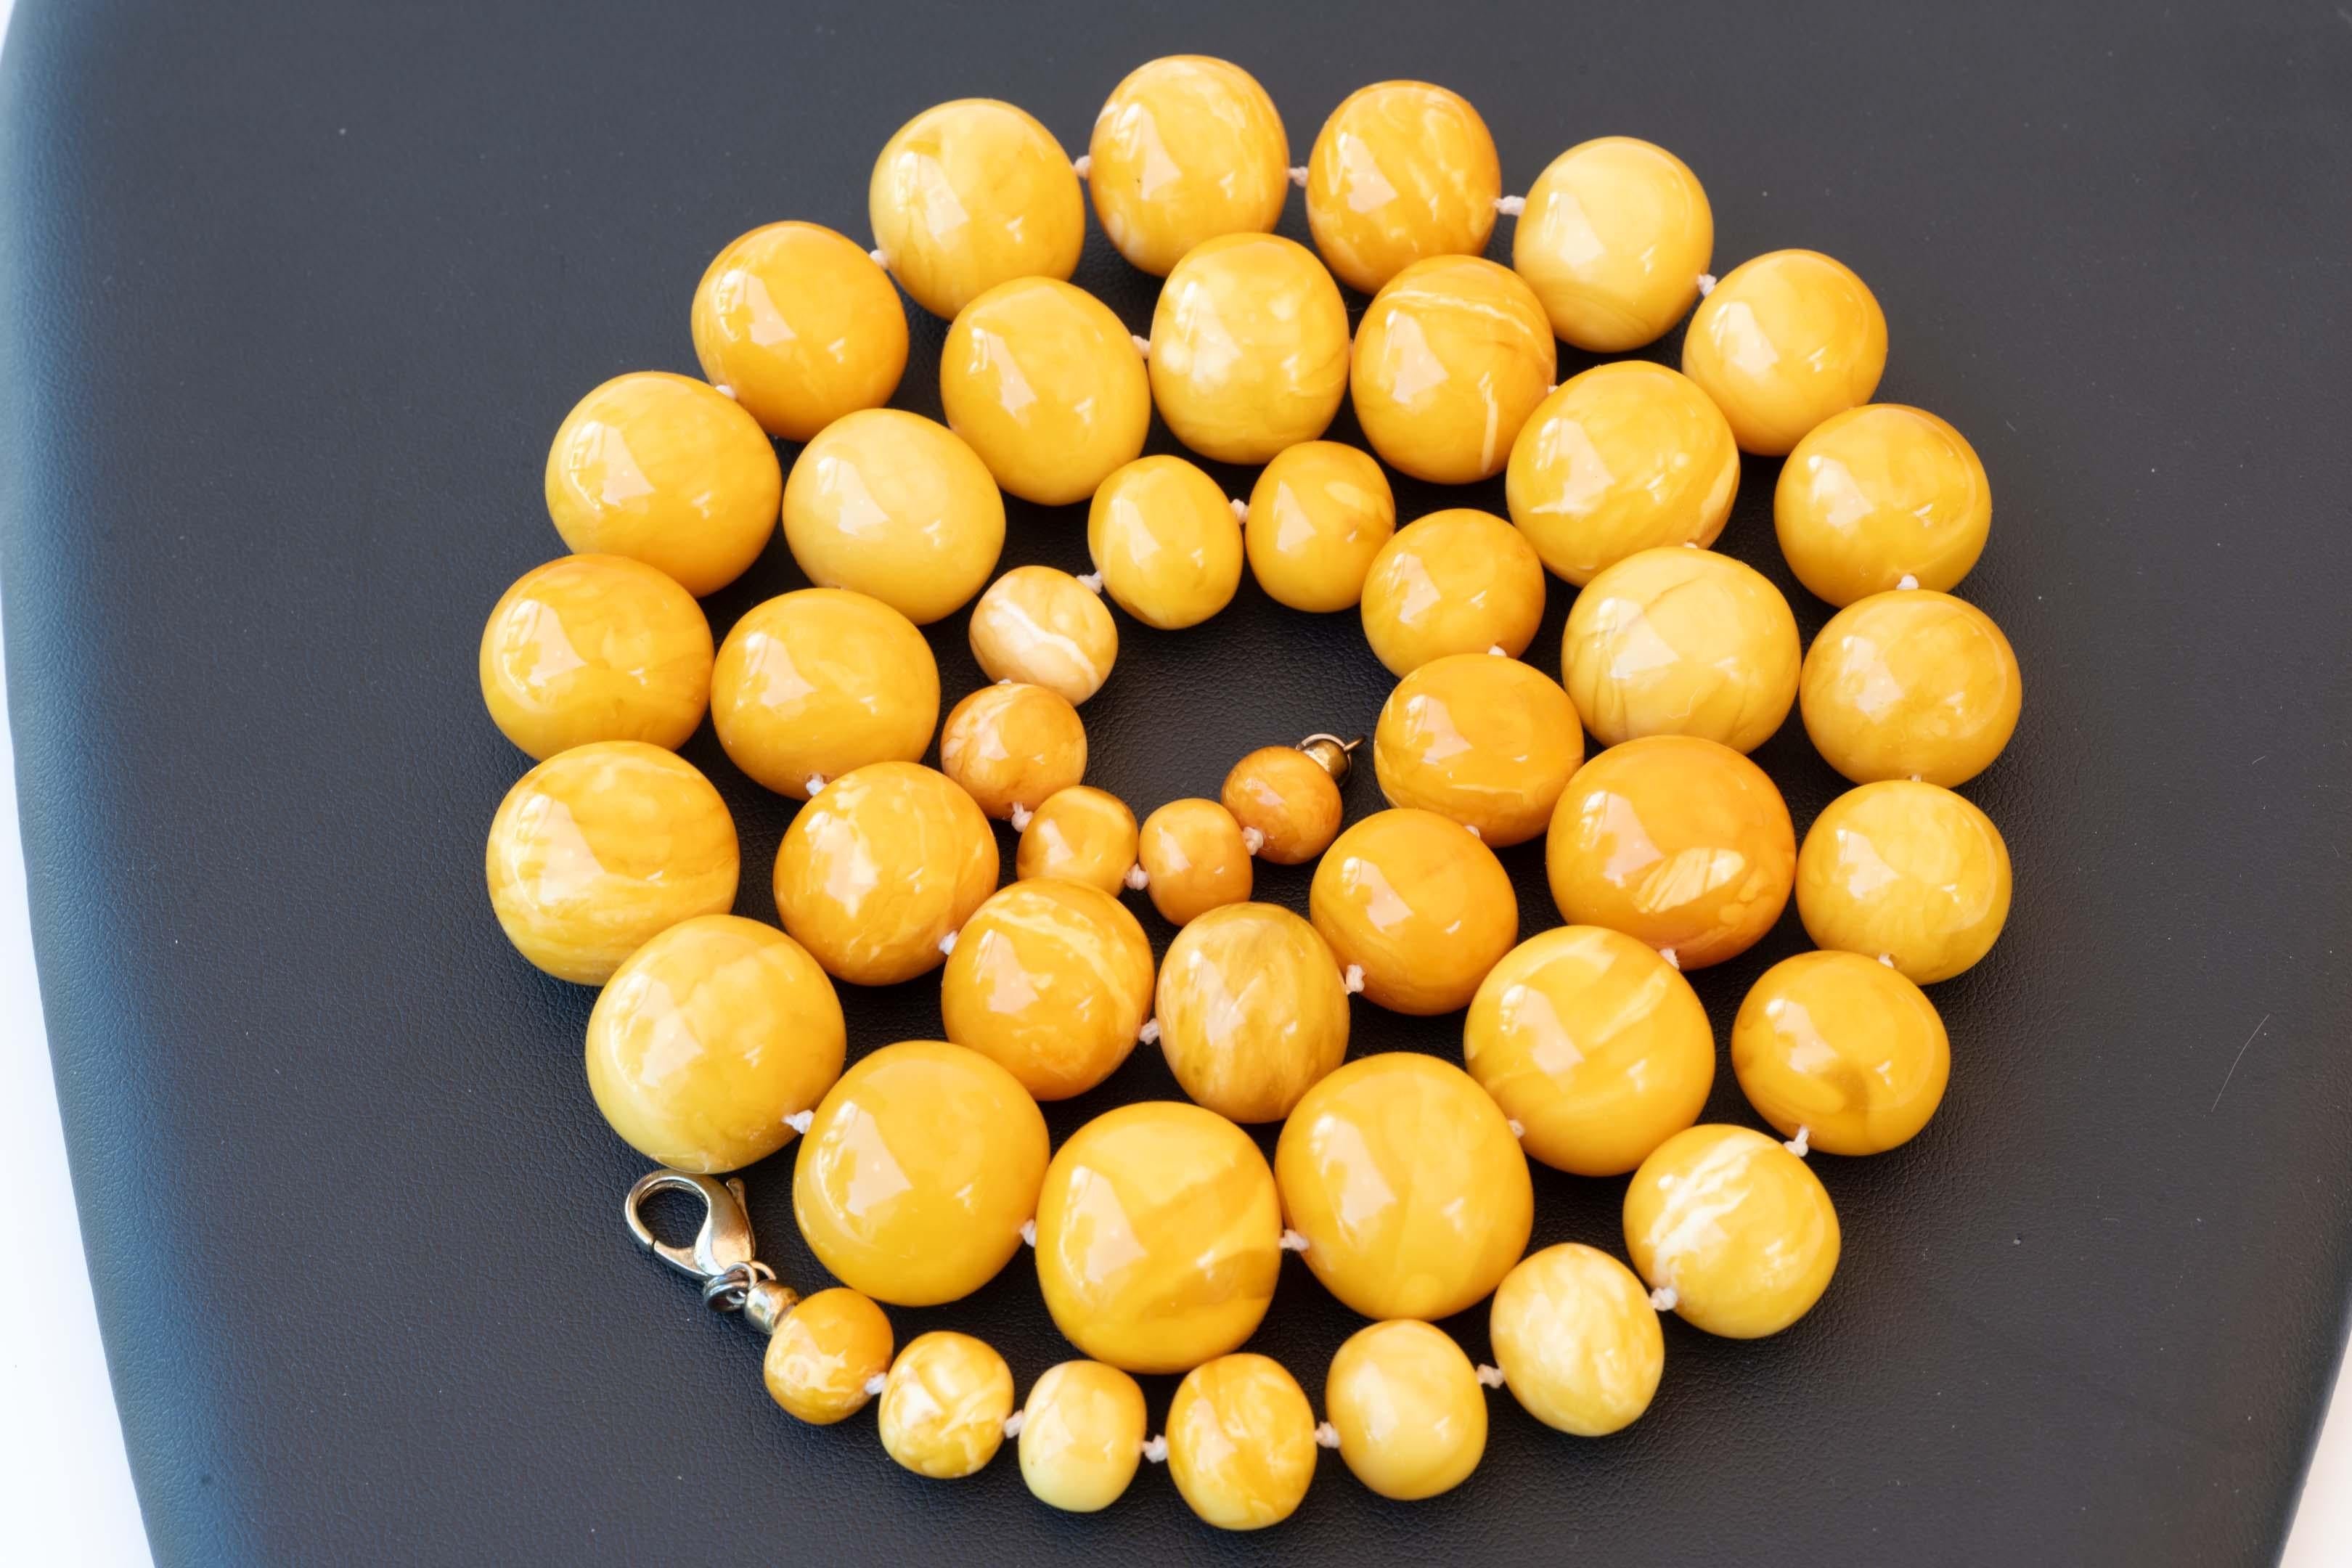 Round Cut Genuine Baltic Amber Egg Yolk 10-20mm 113 gram Bead Necklace For Sale